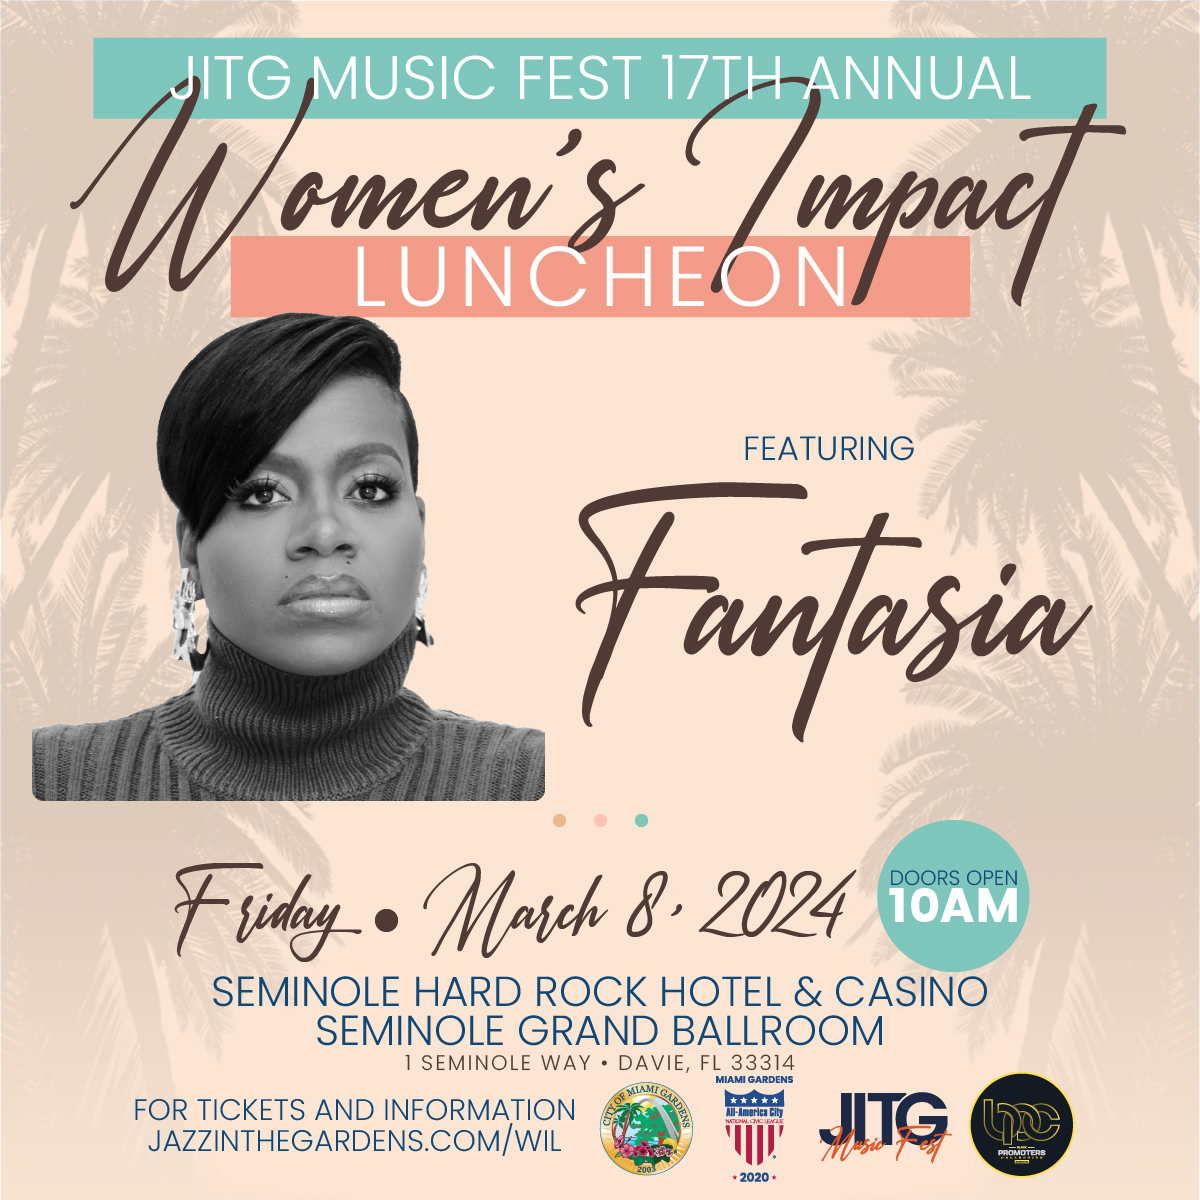 🌟 Big News! Fantasia will keynote the Women's Impact Luncheon during #WomensHistoryMonth in Miami Gardens! 🎤✨ Empowerment, inspiration, and melody await. Gents, you're welcome too! 🌺 #JITG2024 #JITG #JITGMusicFest. Secure your tickets and join us!